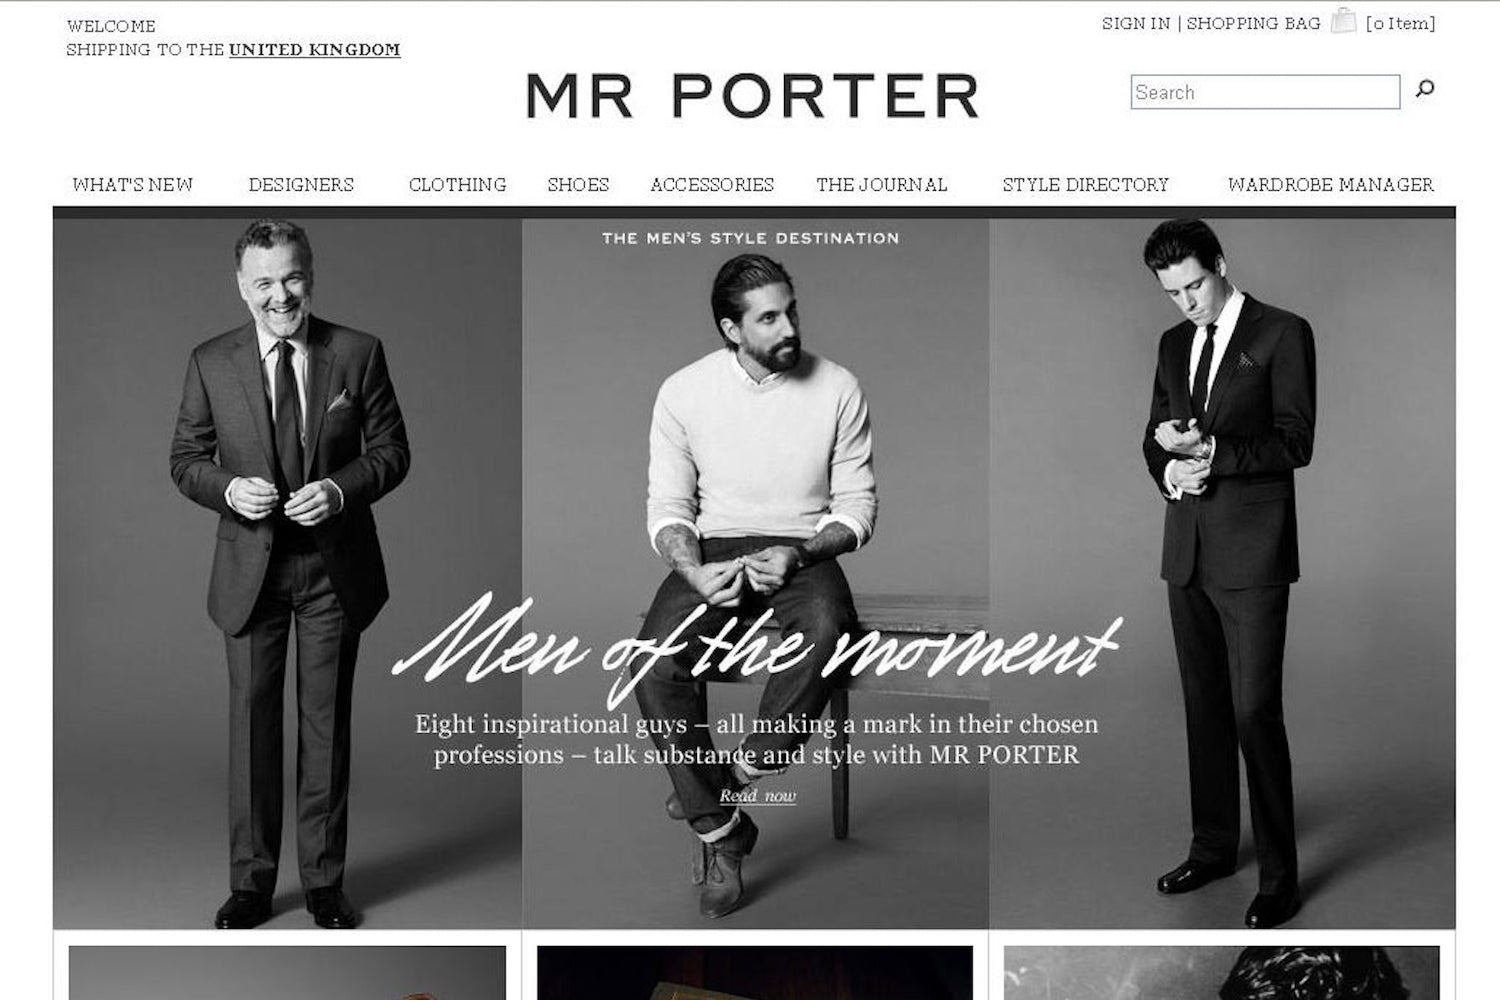 The landing page of the online luxury retailer Mr Porter which now sells luxury pool floats.